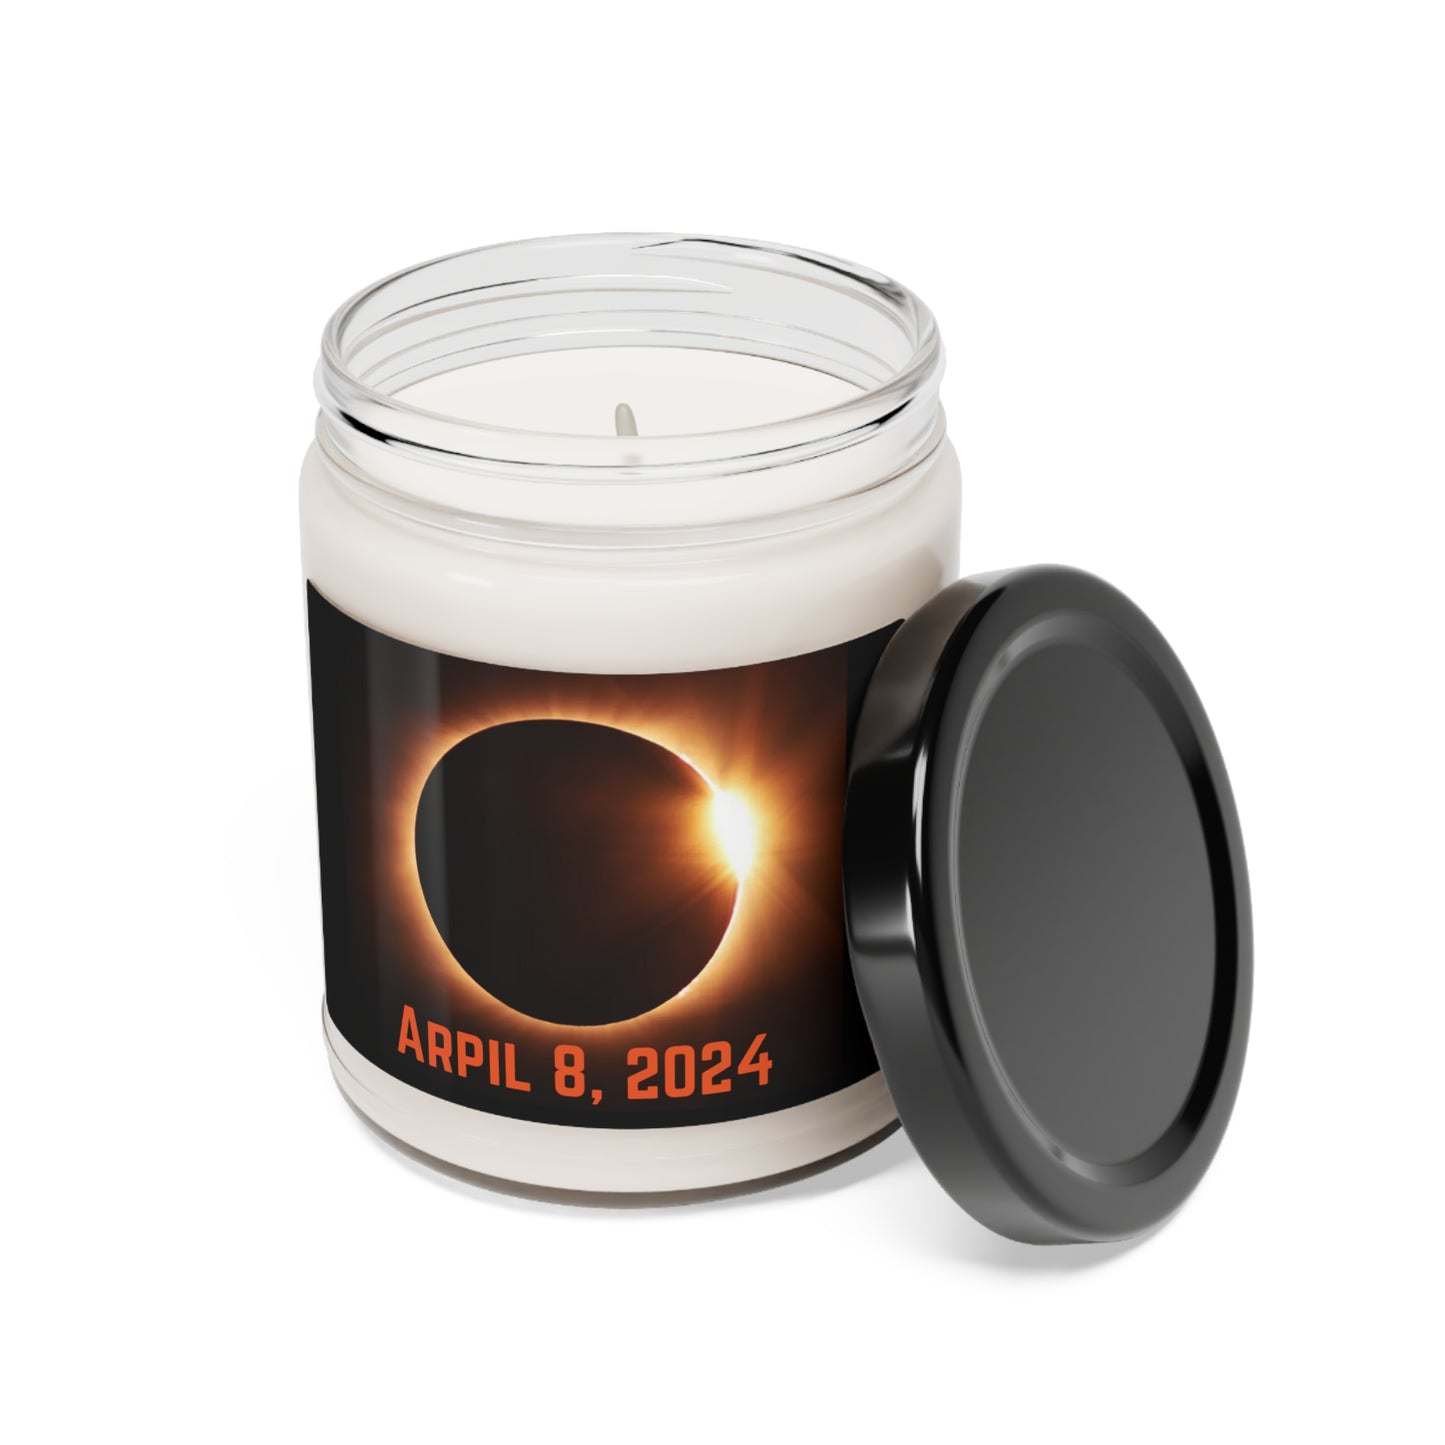 Eclipse 2024 Scented Soy Candle, 9oz